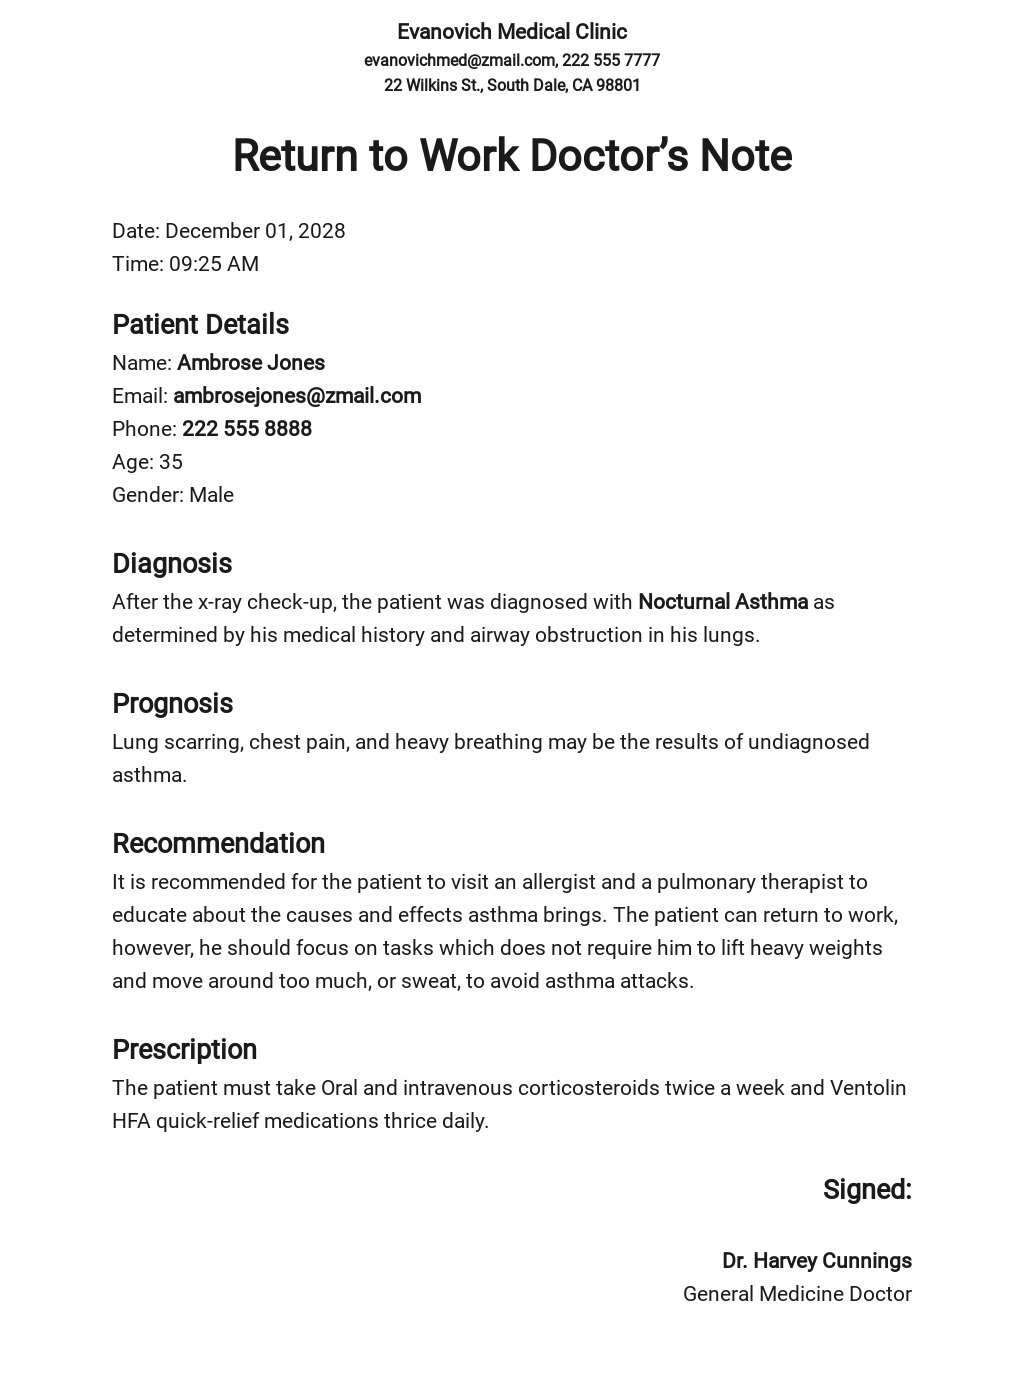 Return To Work Doctors Note Template Word (DOC) Apple (MAC) Pages